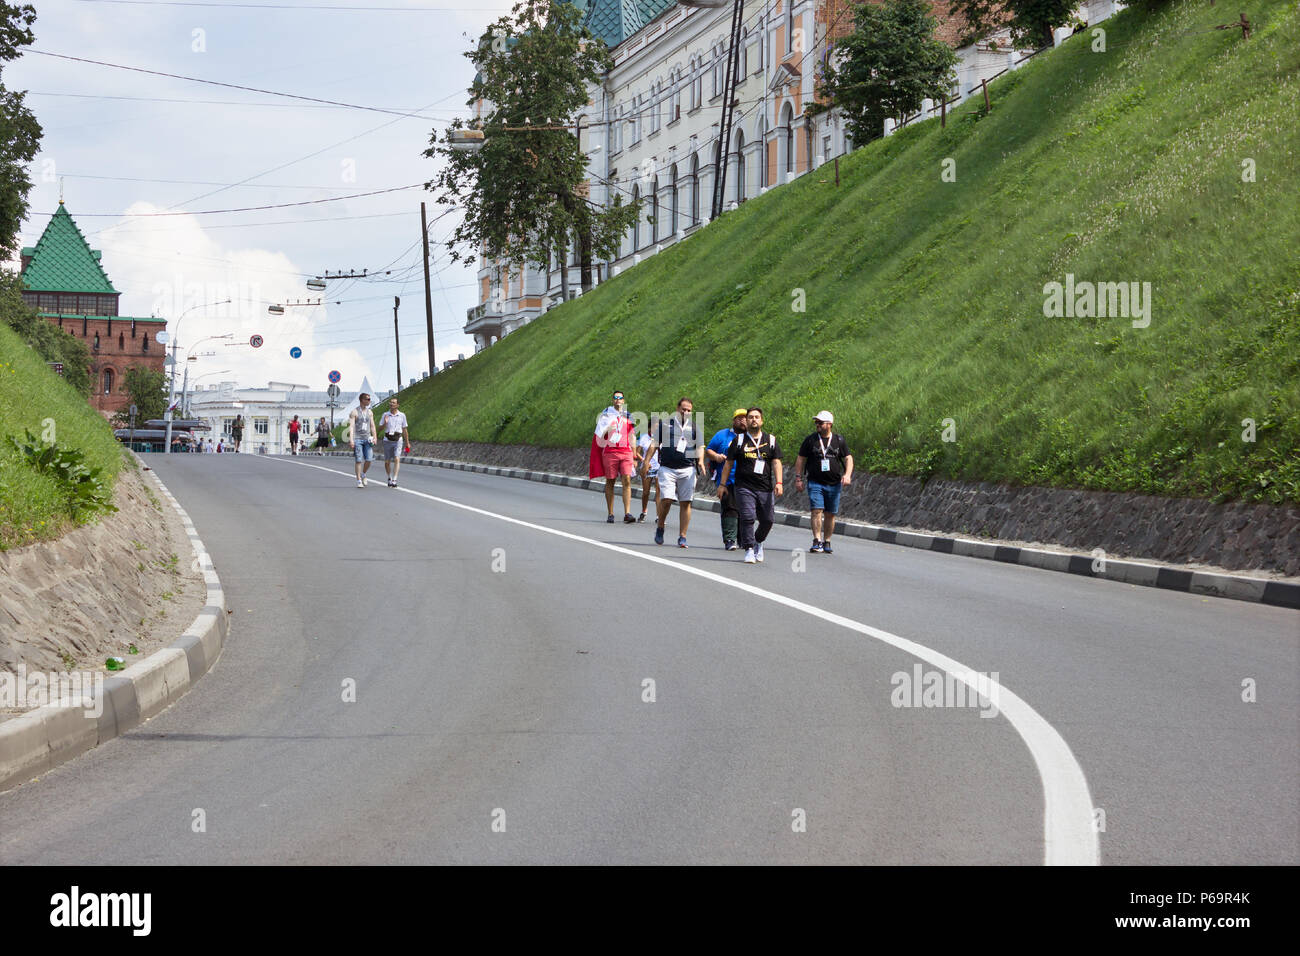 Nizhny Novgorod, Russia - June 24, 2018: It one of the cities of the World Cup 2018 in Russia. Many of the city's roads are open for hiking fans Stock Photo